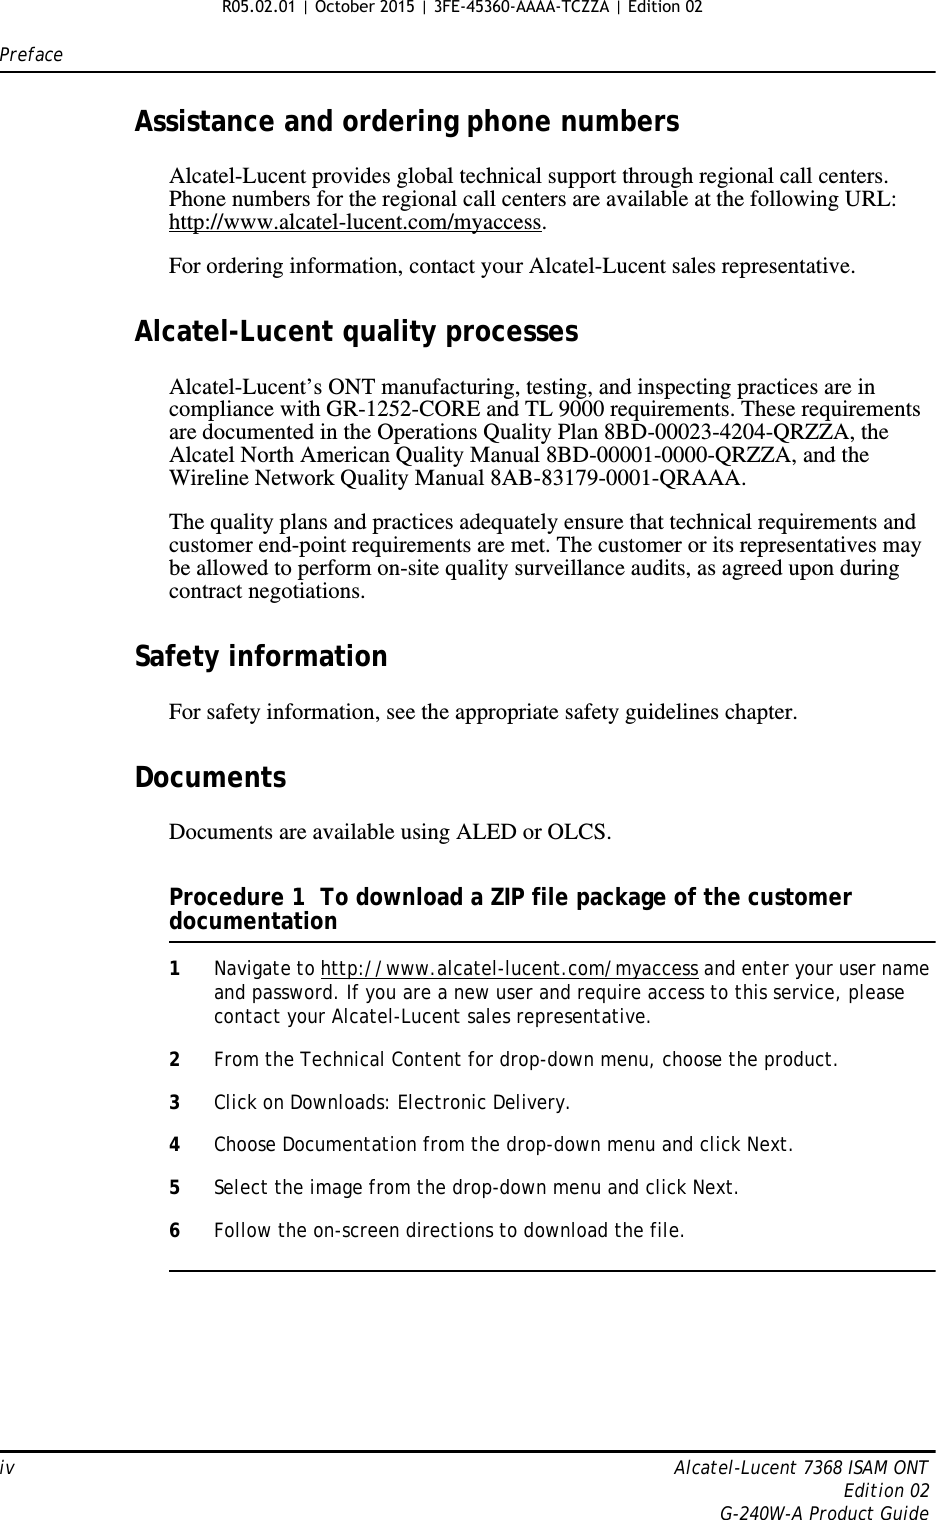 Prefaceiv Alcatel-Lucent 7368 ISAM ONTEdition 02G-240W-A Product GuideAssistance and ordering phone numbersAlcatel-Lucent provides global technical support through regional call centers. Phone numbers for the regional call centers are available at the following URL: http://www.alcatel-lucent.com/myaccess. For ordering information, contact your Alcatel-Lucent sales representative.Alcatel-Lucent quality processesAlcatel-Lucent’s ONT manufacturing, testing, and inspecting practices are in compliance with GR-1252-CORE and TL 9000 requirements. These requirements are documented in the Operations Quality Plan 8BD-00023-4204-QRZZA, the Alcatel North American Quality Manual 8BD-00001-0000-QRZZA, and the Wireline Network Quality Manual 8AB-83179-0001-QRAAA.The quality plans and practices adequately ensure that technical requirements and customer end-point requirements are met. The customer or its representatives may be allowed to perform on-site quality surveillance audits, as agreed upon during contract negotiations.Safety informationFor safety information, see the appropriate safety guidelines chapter.DocumentsDocuments are available using ALED or OLCS.Procedure 1  To download a ZIP file package of the customer documentation1Navigate to http://www.alcatel-lucent.com/myaccess and enter your user name and password. If you are a new user and require access to this service, please contact your Alcatel-Lucent sales representative.2From the Technical Content for drop-down menu, choose the product.3Click on Downloads: Electronic Delivery.4Choose Documentation from the drop-down menu and click Next.5Select the image from the drop-down menu and click Next.6Follow the on-screen directions to download the file. R05.02.01 | October 2015 | 3FE-45360-AAAA-TCZZA | Edition 02 